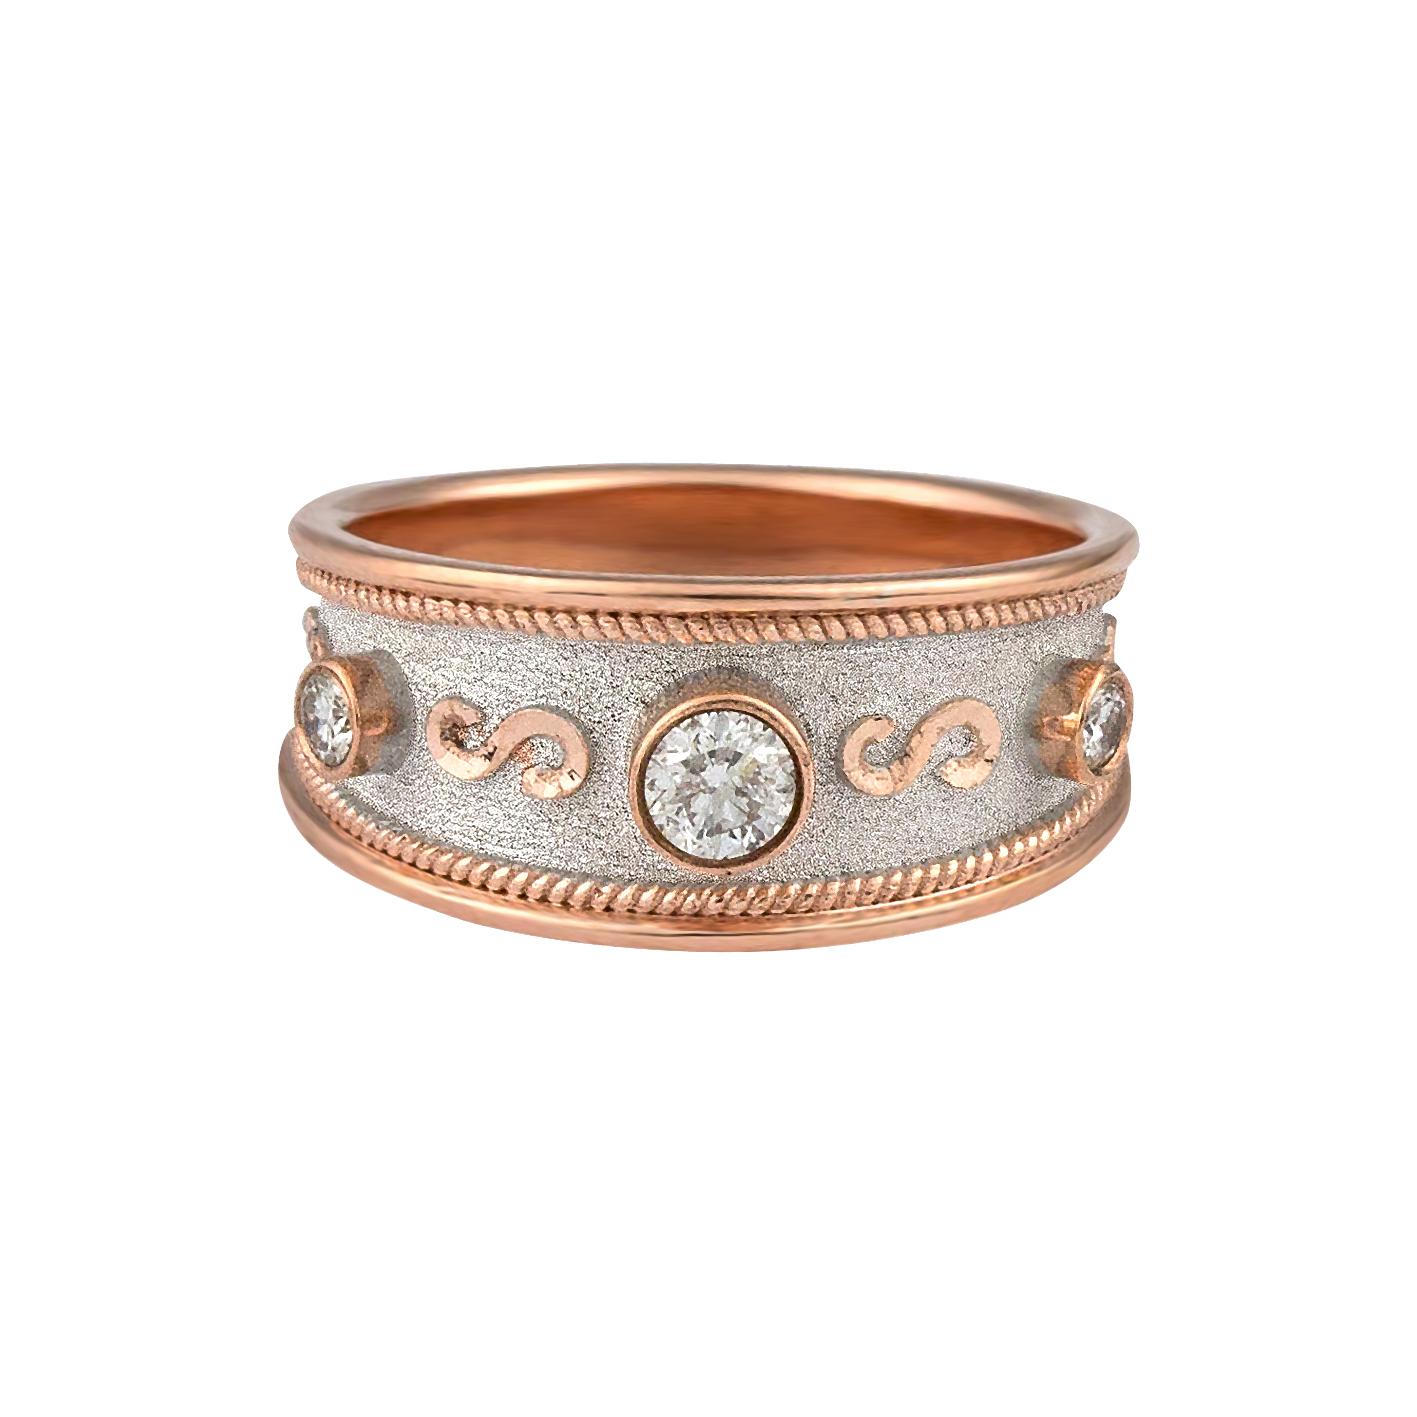 S.Georgios design ring handmade from solid 18 Karat Rose Gold all custom-made. This graduated ring is microscopically decorated with rose gold wires and granulated details contrast with a unique Byzantine velvet background finished in White Rhodium.